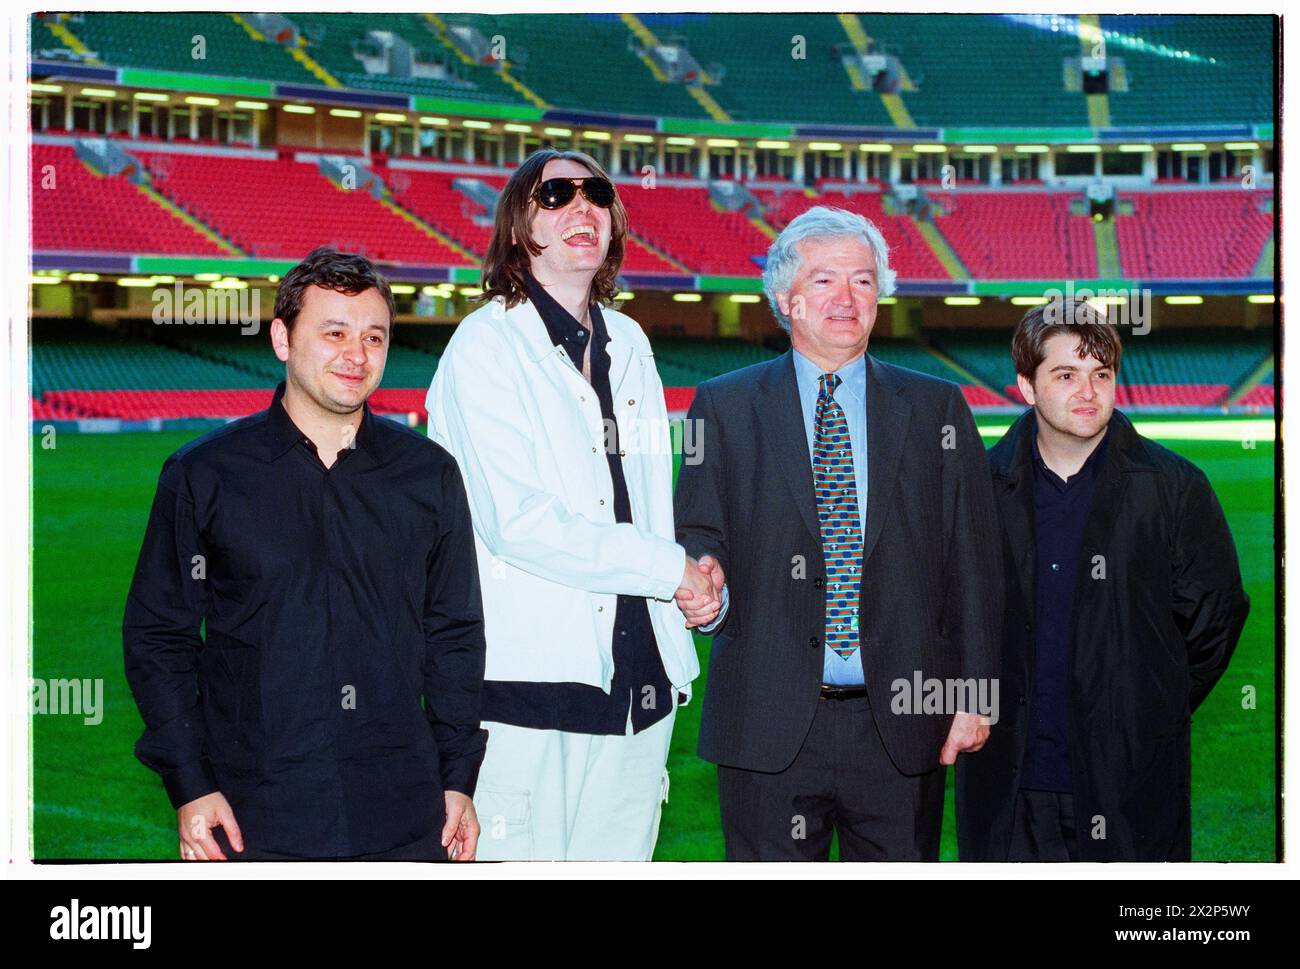 MANIC STREET PREACHERS, PRESS CONFERENCE, 1999: Welsh band Manic Street Preachers with Glanmor Griffiths  from the WRU at a Press Conference at Millennium Stadium, Cardiff Wales, UK on 1 November 1999. The band were promoting their millennium night gig in front of more than 57,000 fans on New Year's Eve 1999–2000 at the Millennium Stadium in Cardiff, called 'Leaving The 20th Century'. Photo: Rob Watkins. INFO: Manic Street Preachers, a Welsh rock band formed in 1986, emerged as icons of the '90s British music scene. Known for their politically charged lyrics and anthemic melodies, hits like 'A Stock Photo